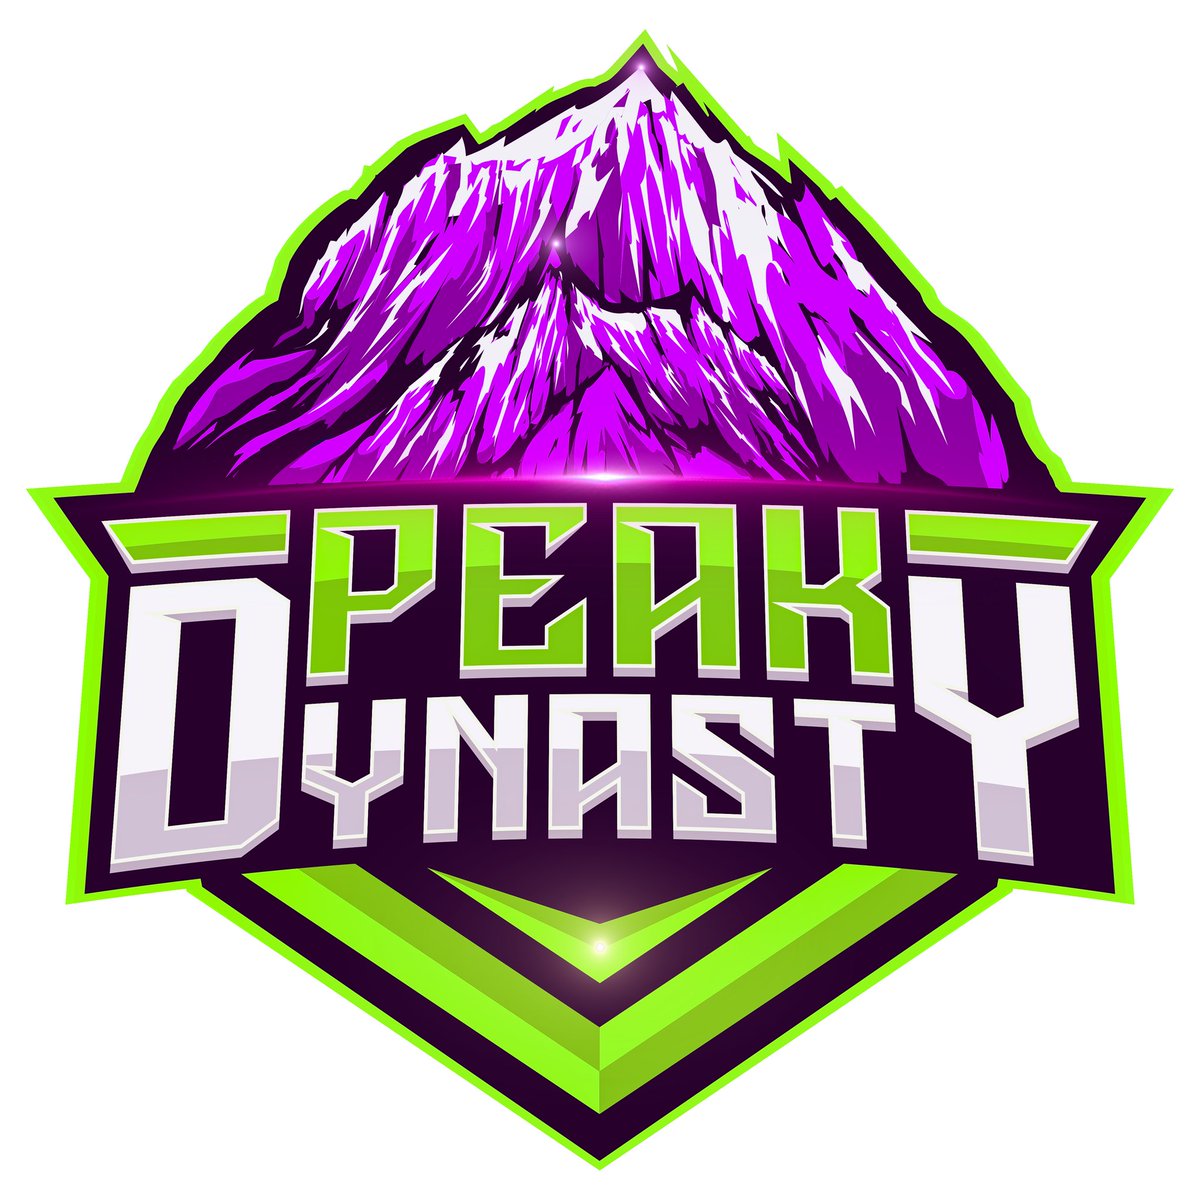 Every month, Peak recognizes our members for their outstanding performance throughout our clans. Here are the Peak Dynasty Members of the Month!

Andrew, Gustav0, Day, Leon, Mystik
Nighthawks - SmellyJelly, Jacosher, Kemo, Dansev, Normal Boy, Lemmy, WaltyWizard, Bnee, Laverniten